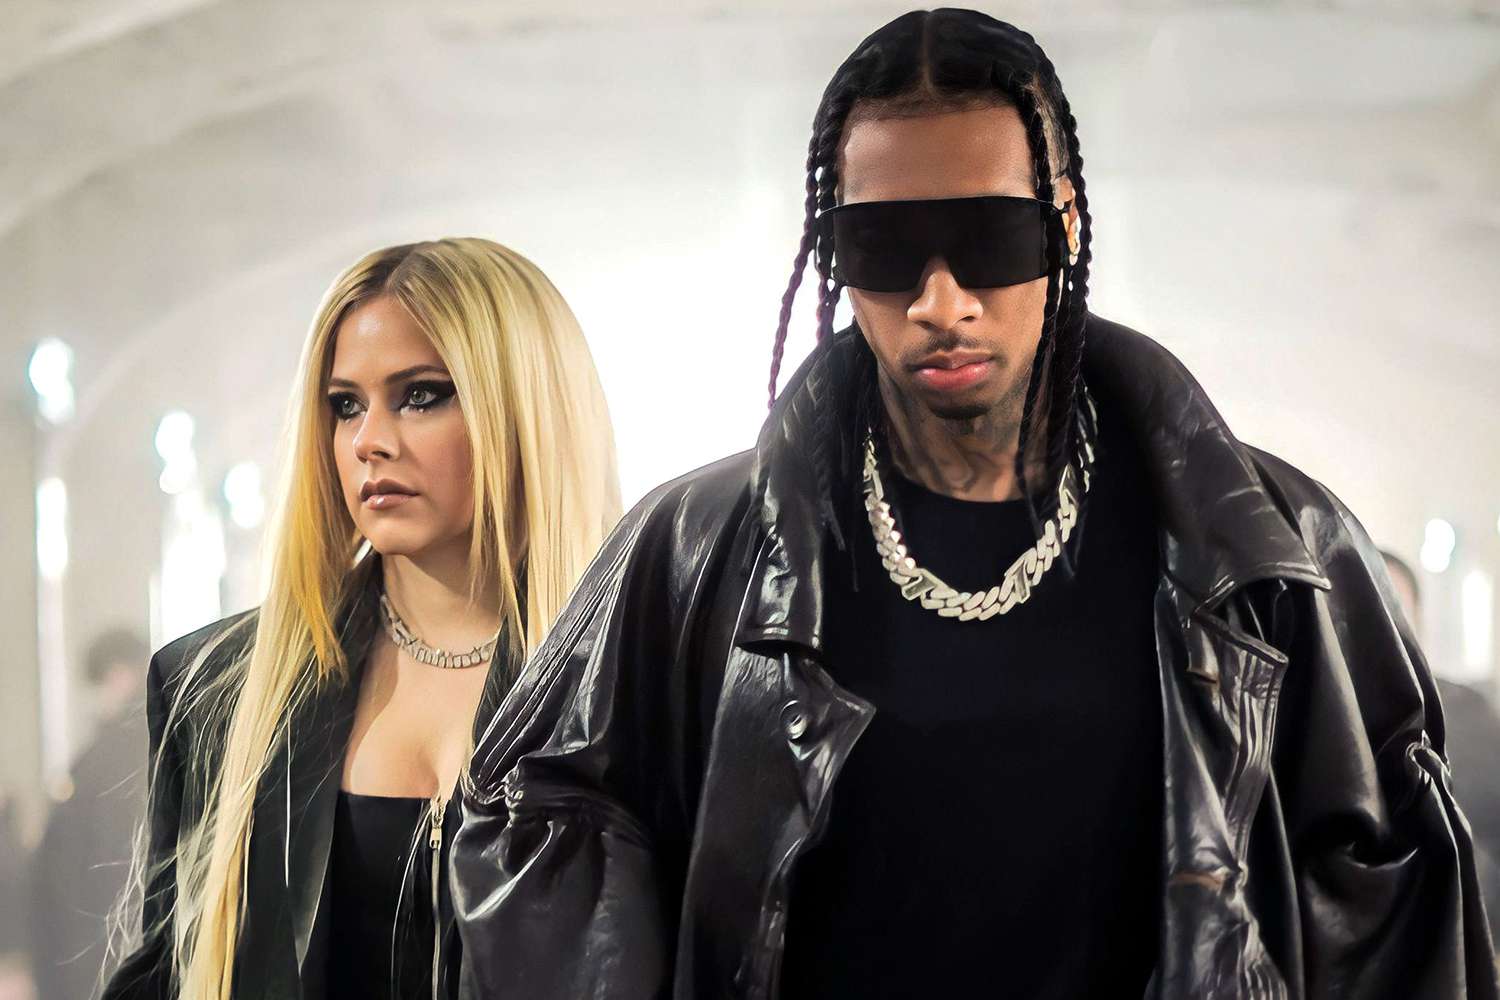 1500px x 1000px - Tyga and Avril Lavigne's Relationship Comes to an End